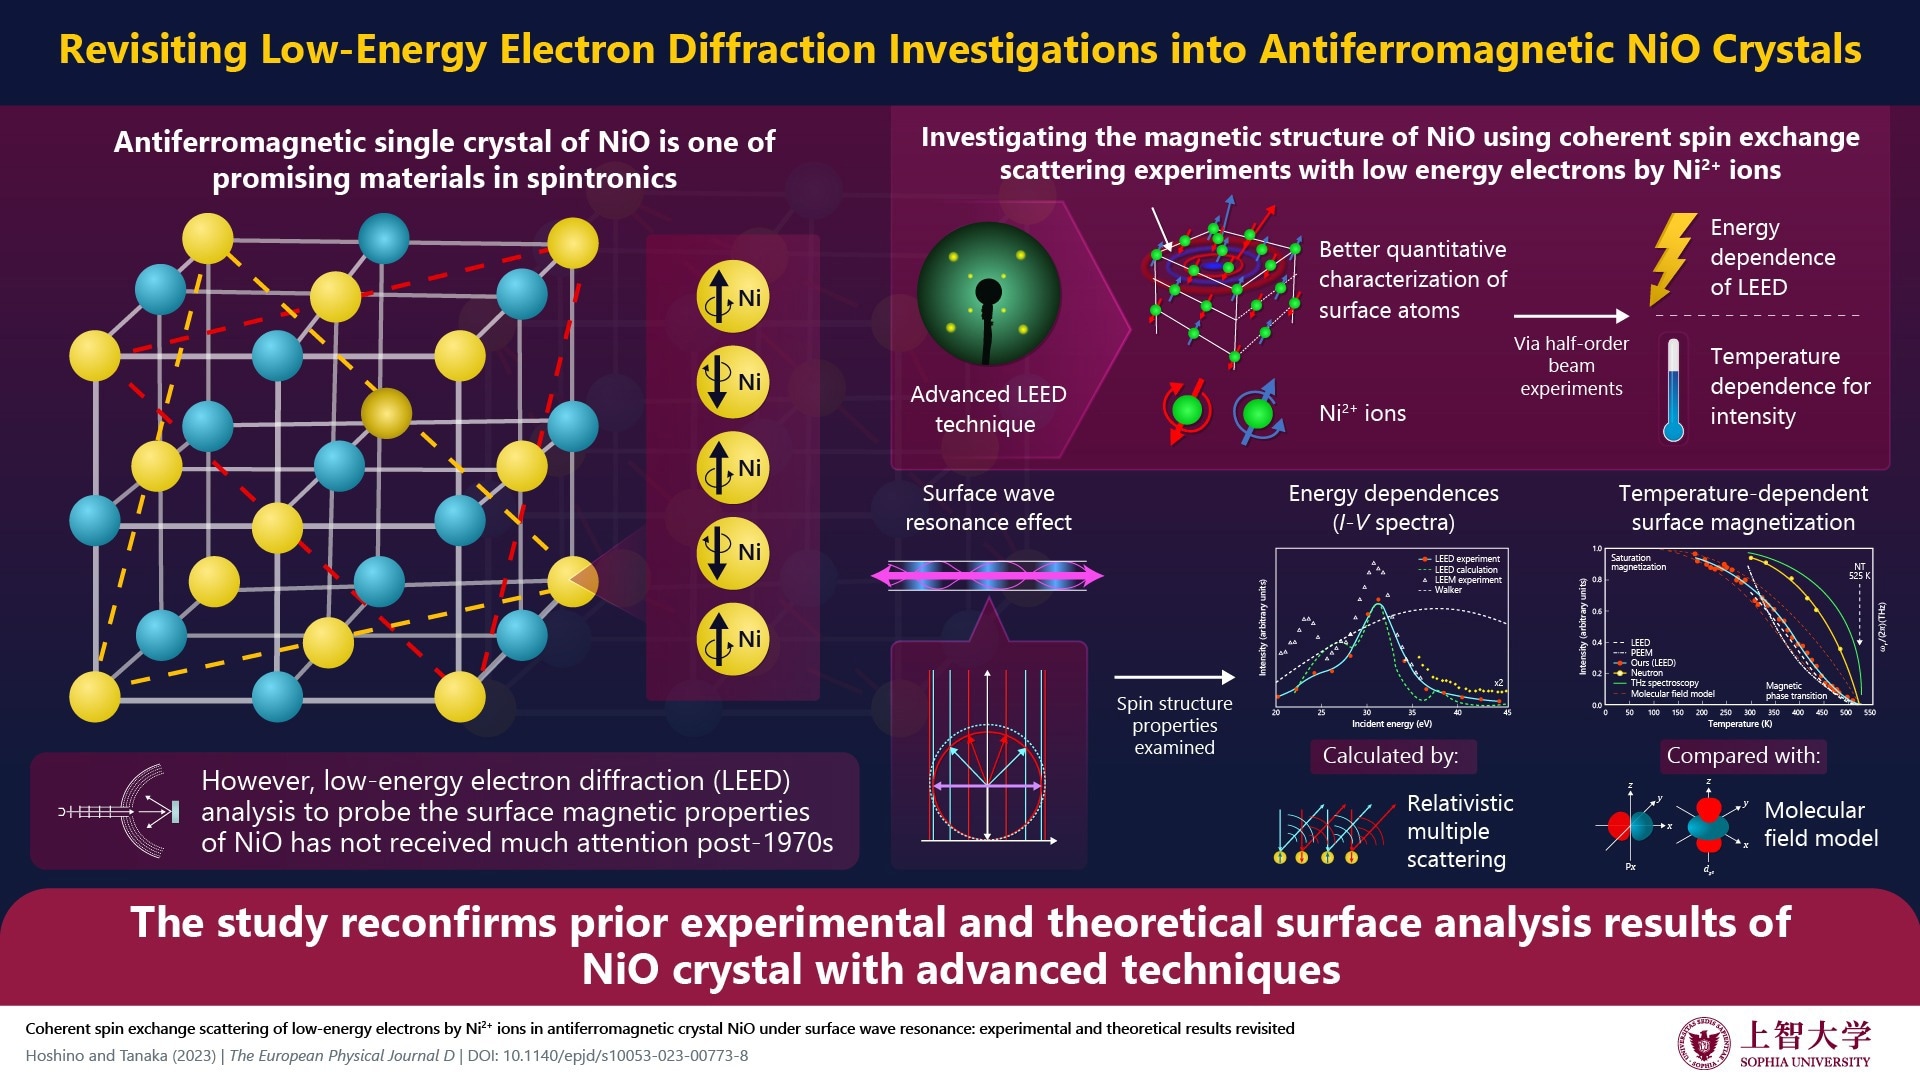 Exploring the Surface Properties of NiO with Low-Energy Electron Diffraction